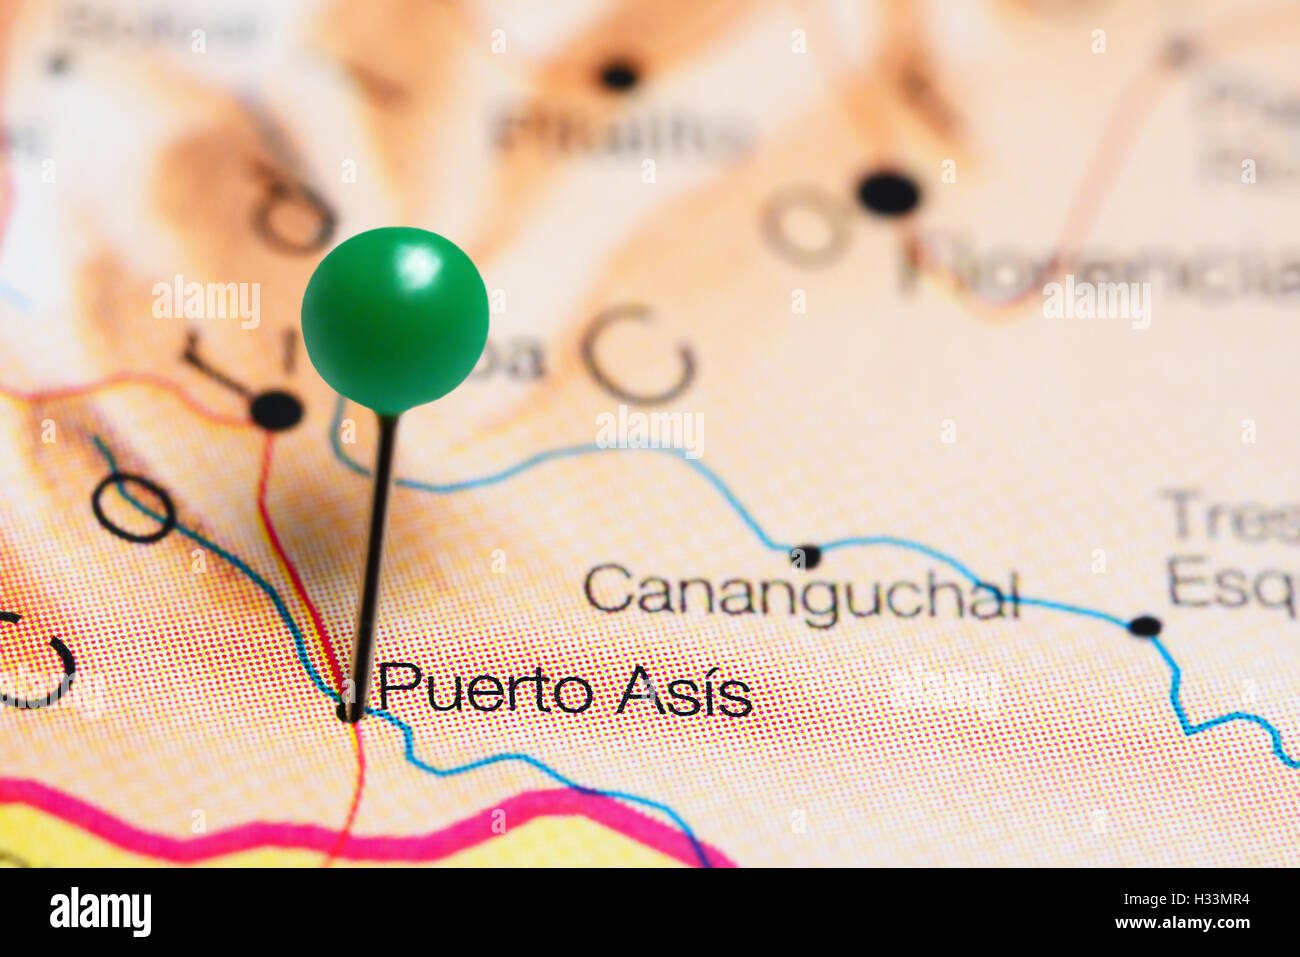 Puerto Asis pinned on a map of Colombia Stock Photo